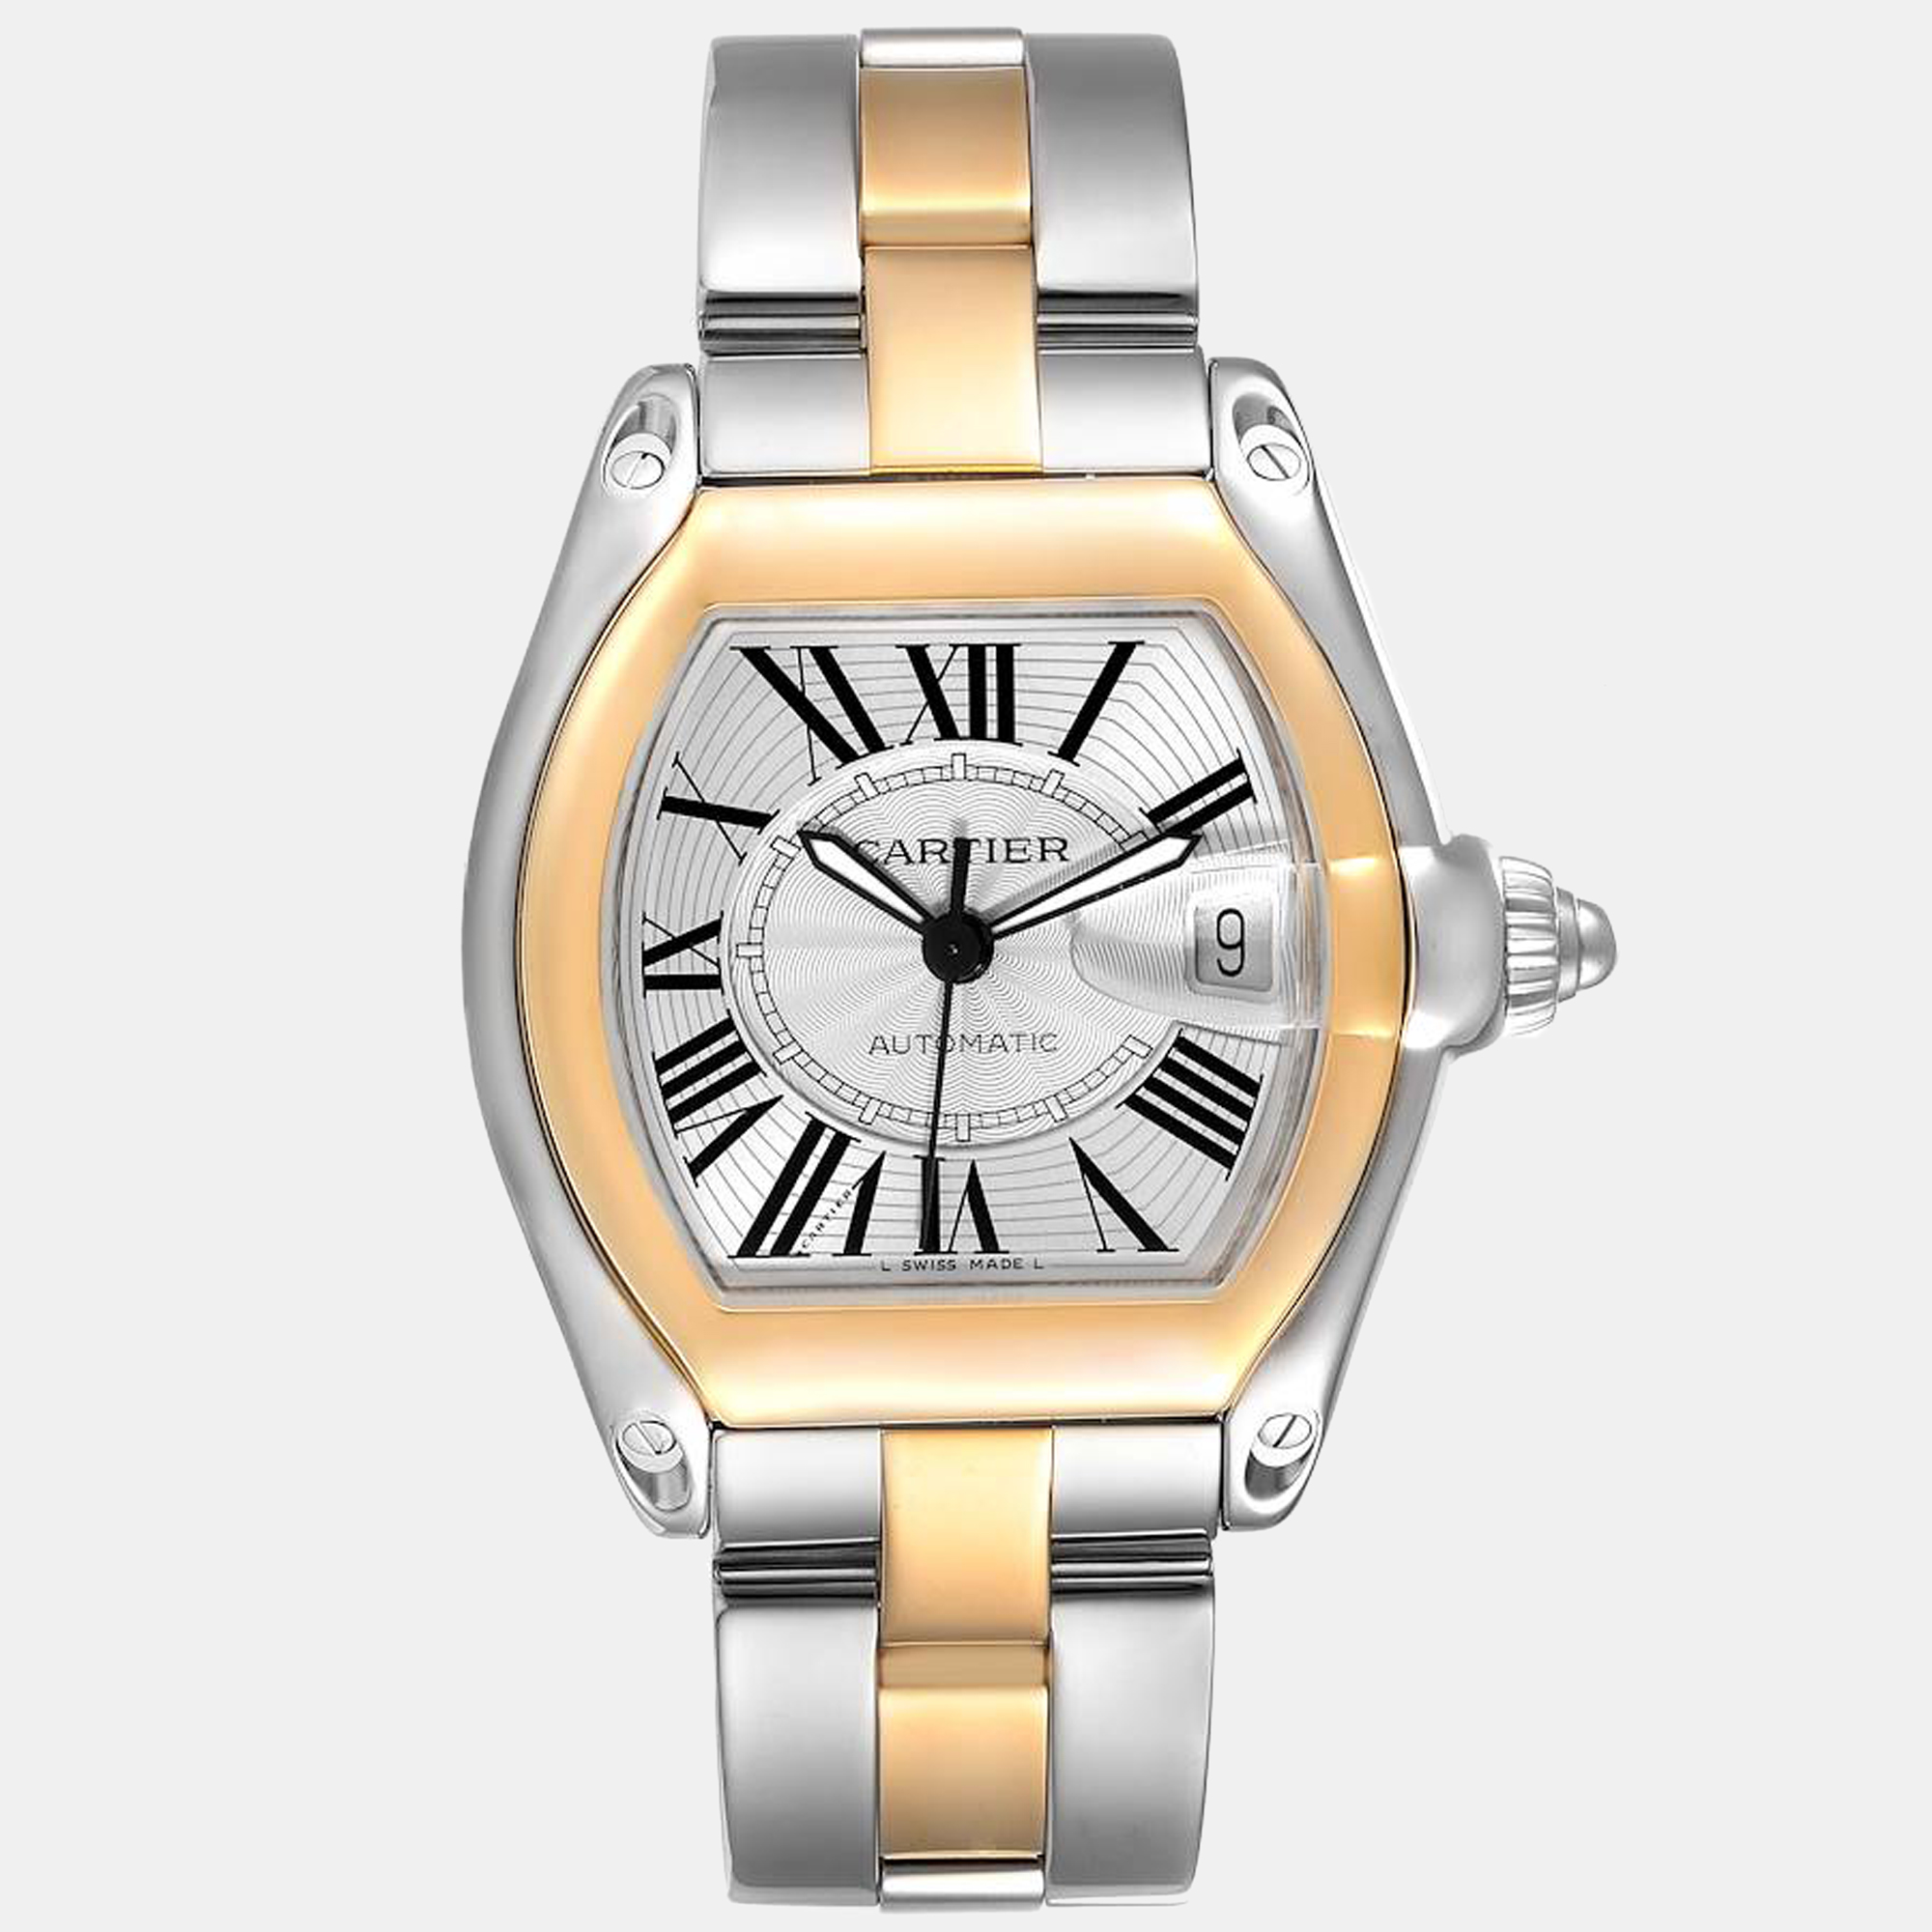 Pre-owned Cartier Silver 18k Yellow Gold And Stainless Steel Roadster W62031y4 Automatic Men's Wristwatch 38 Mm